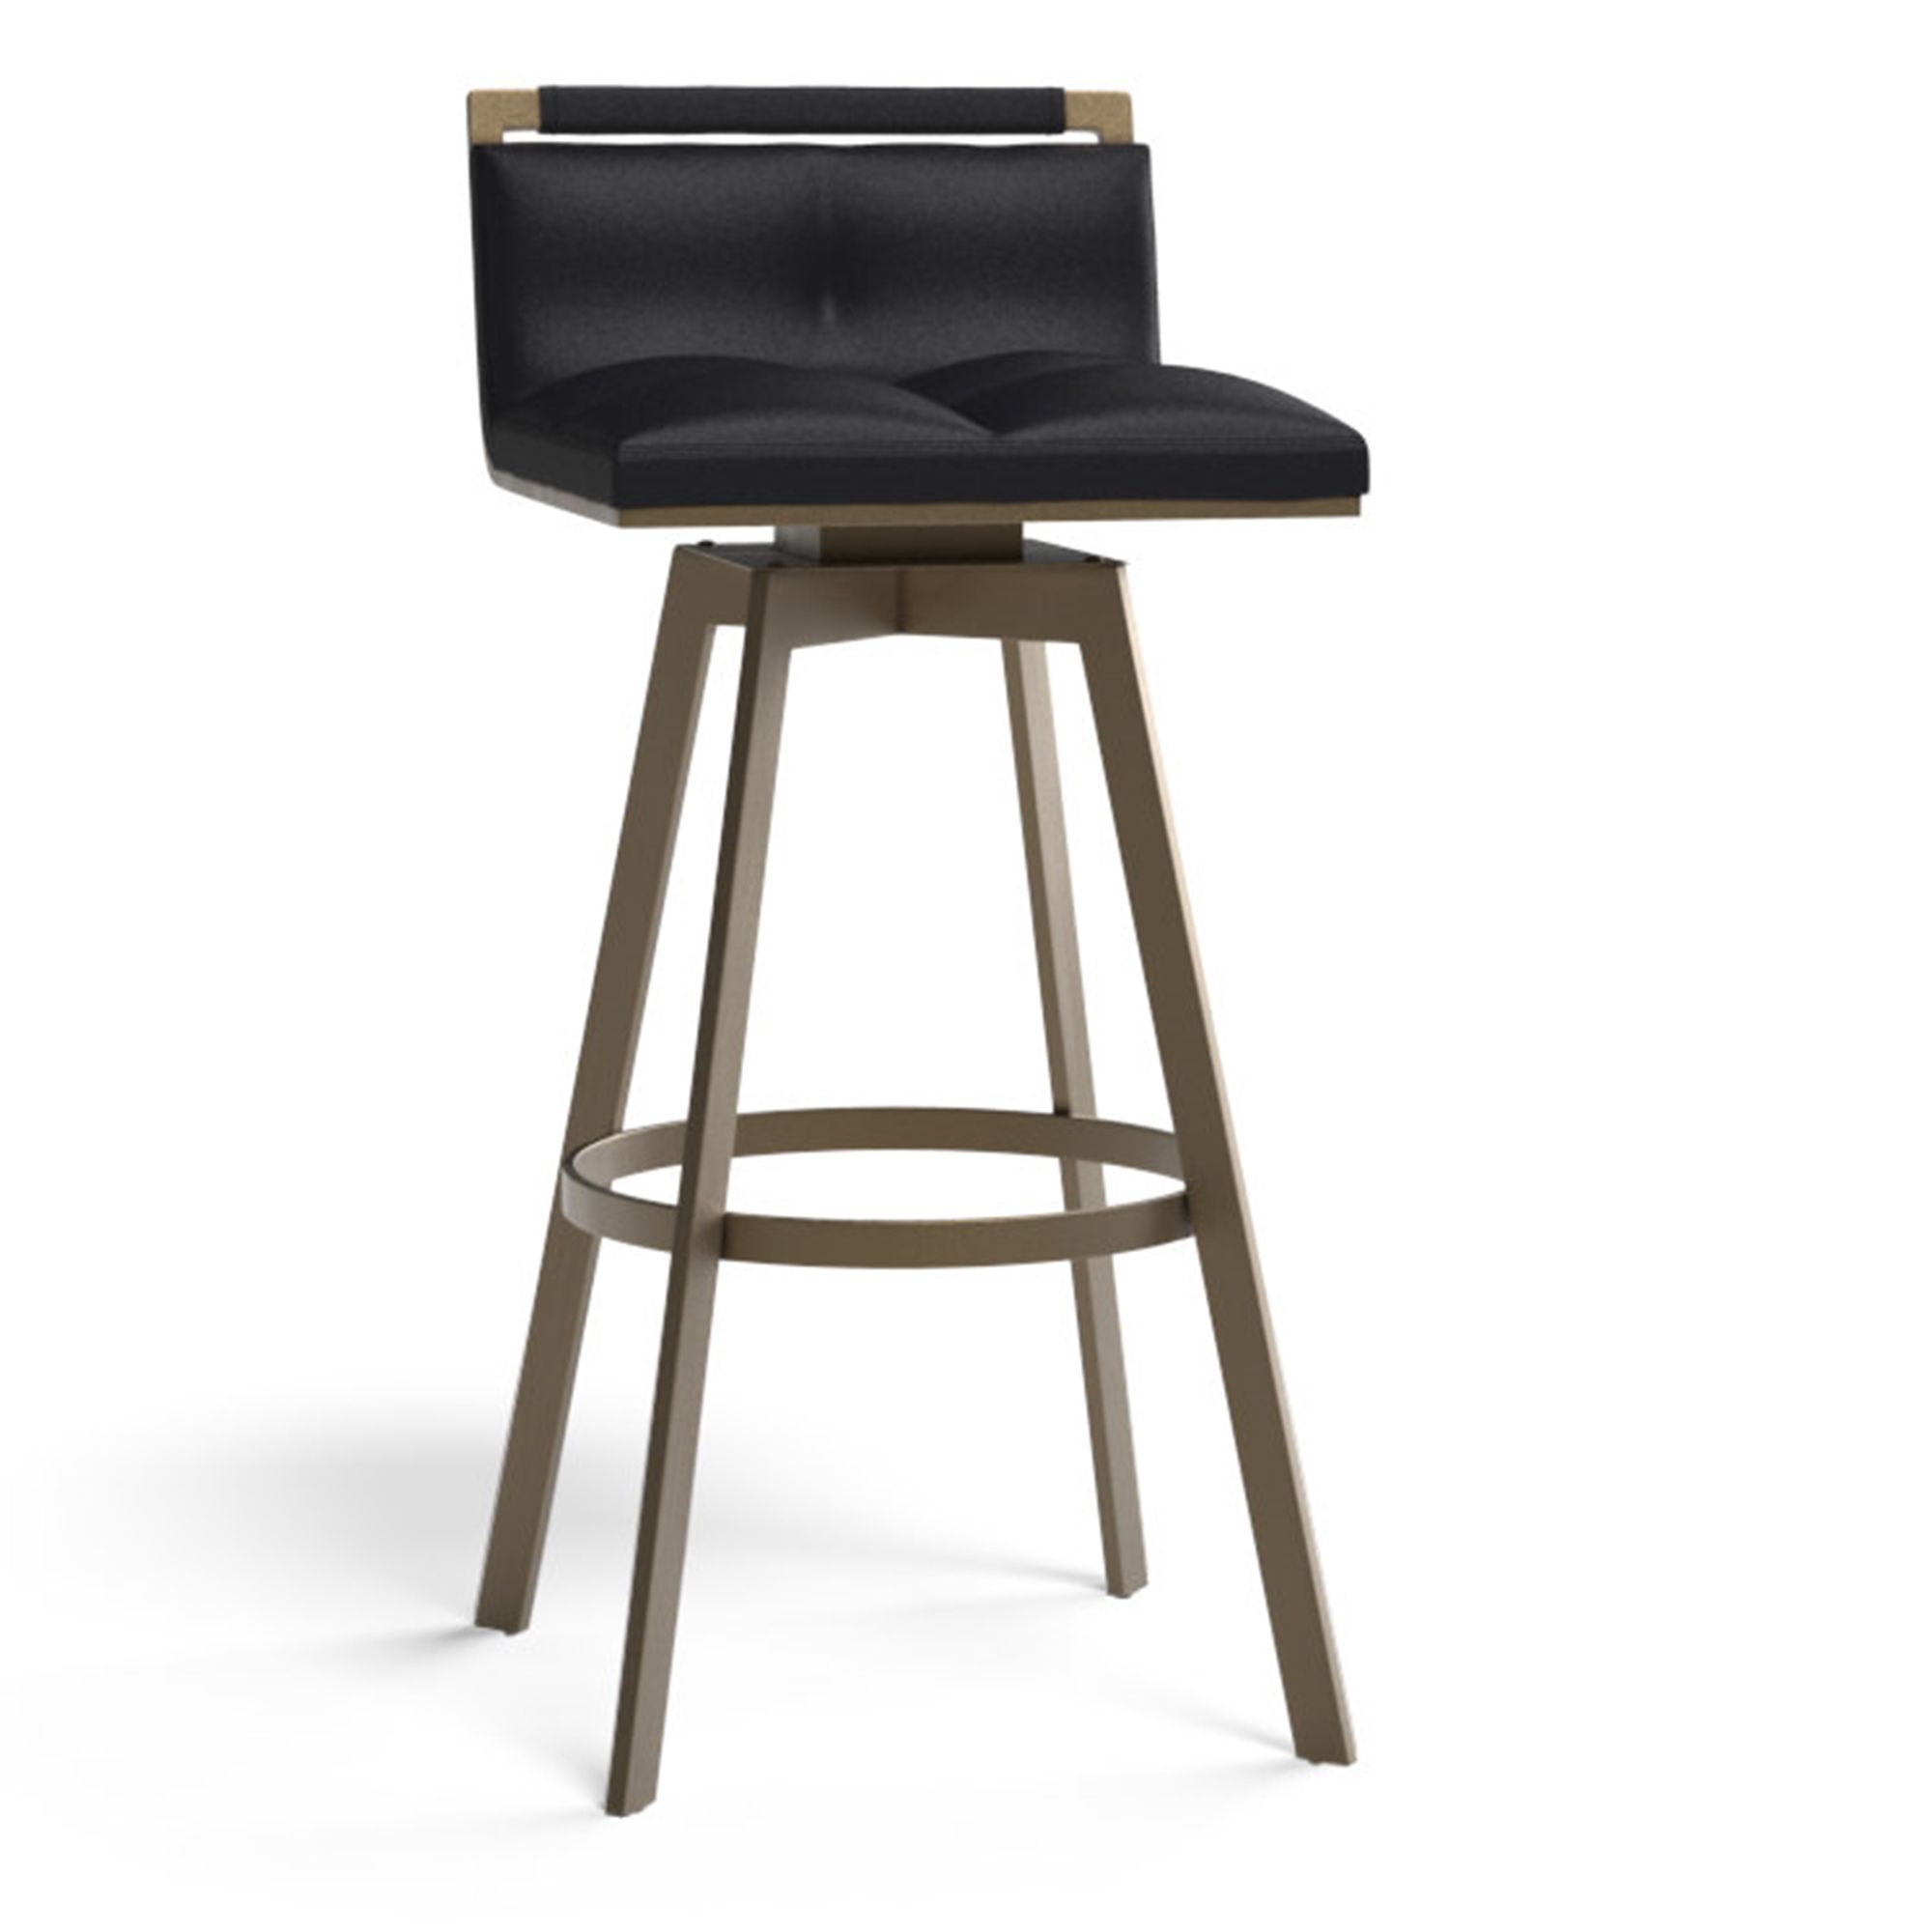 Restaurant Chairs, Stools & Booths :: Black Leather Swivel Counter/bar Pertaining To White Antique Brass Stools (View 8 of 20)